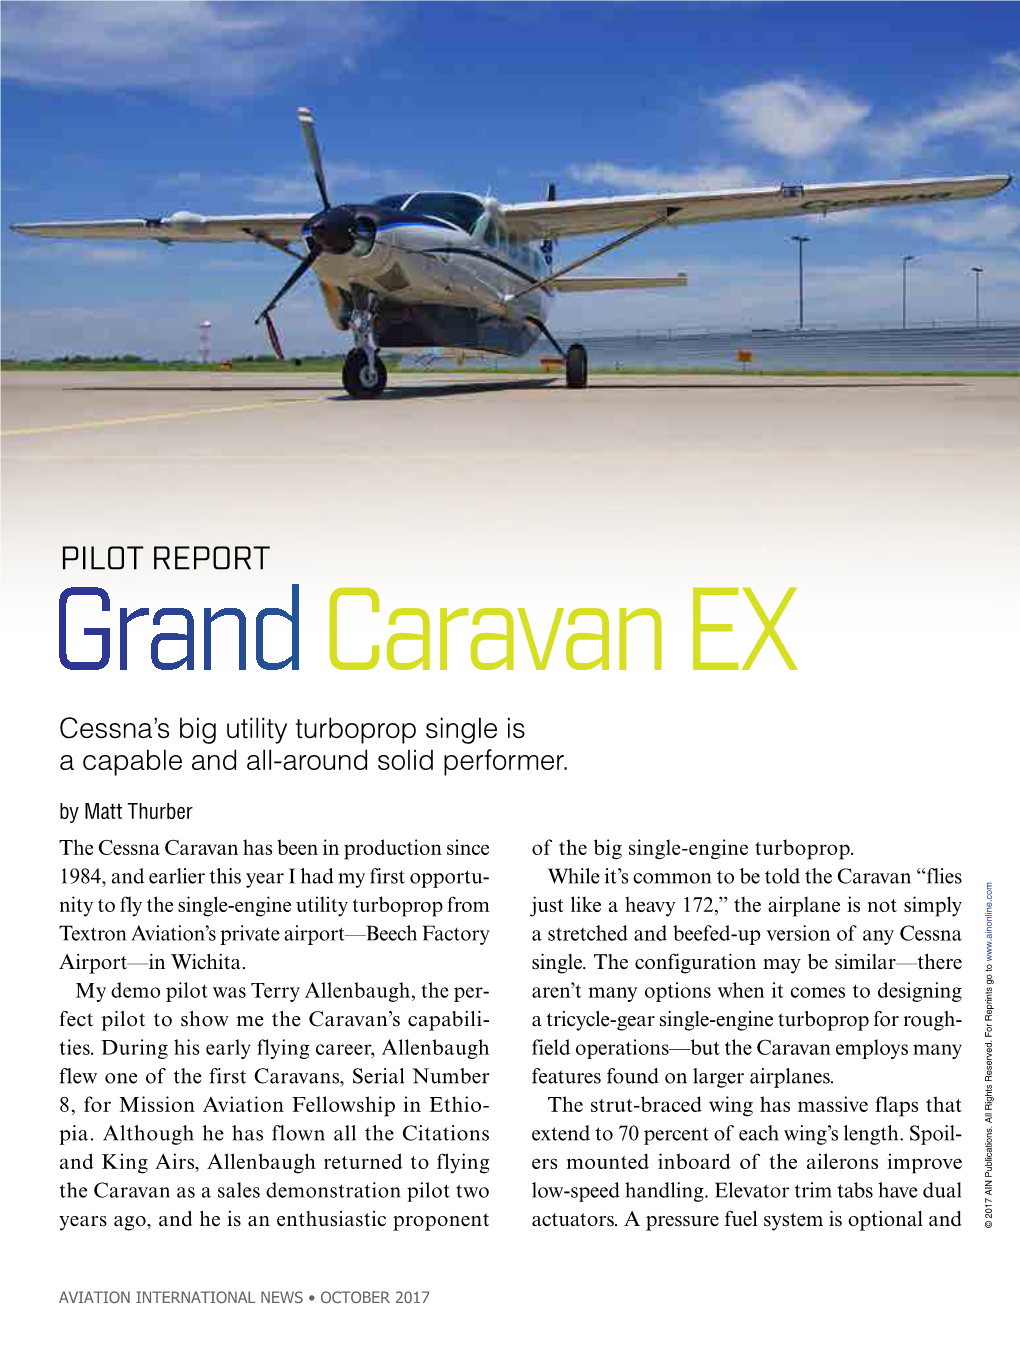 PILOT REPORT Grand Caravan EX Cessna’S Big Utility Turboprop Single Is a Capable and All-Around Solid Performer